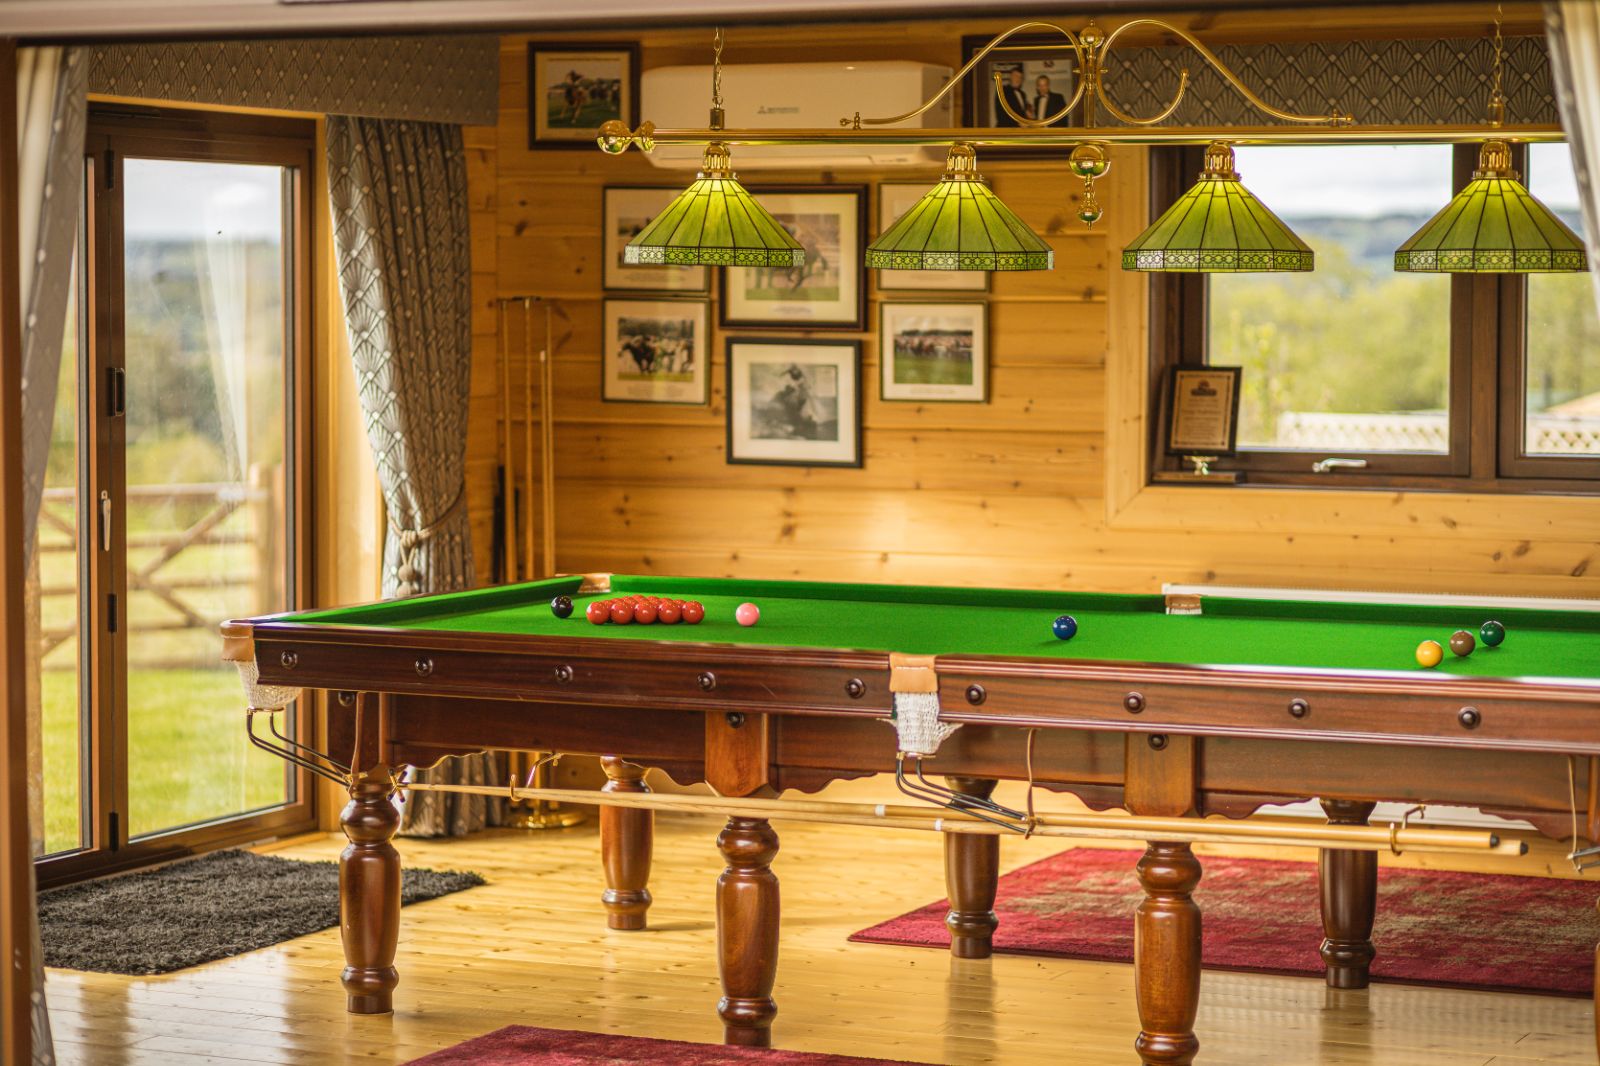 holiday home games room